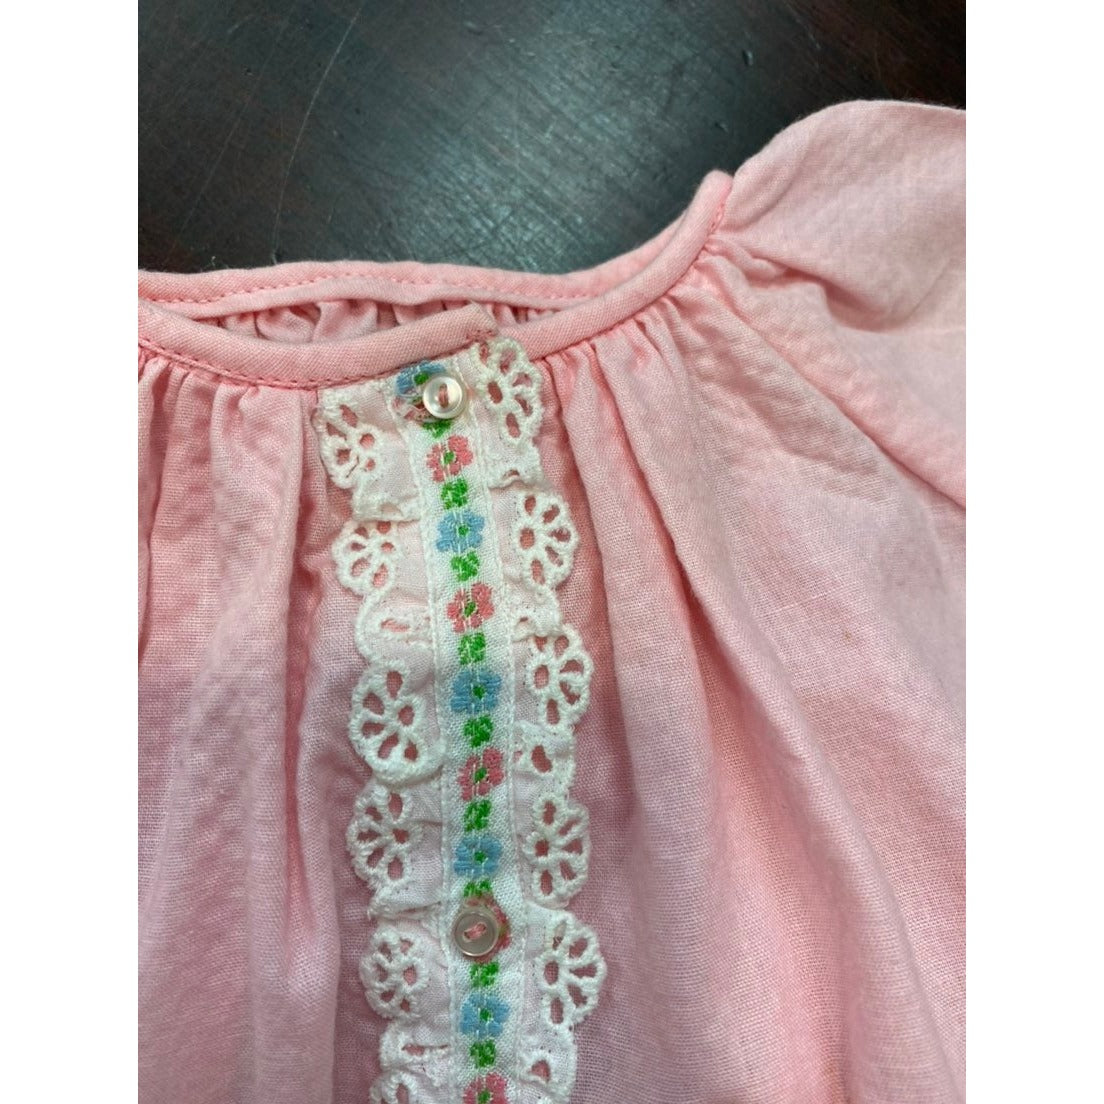 Vintage baby girls embroidered day gown